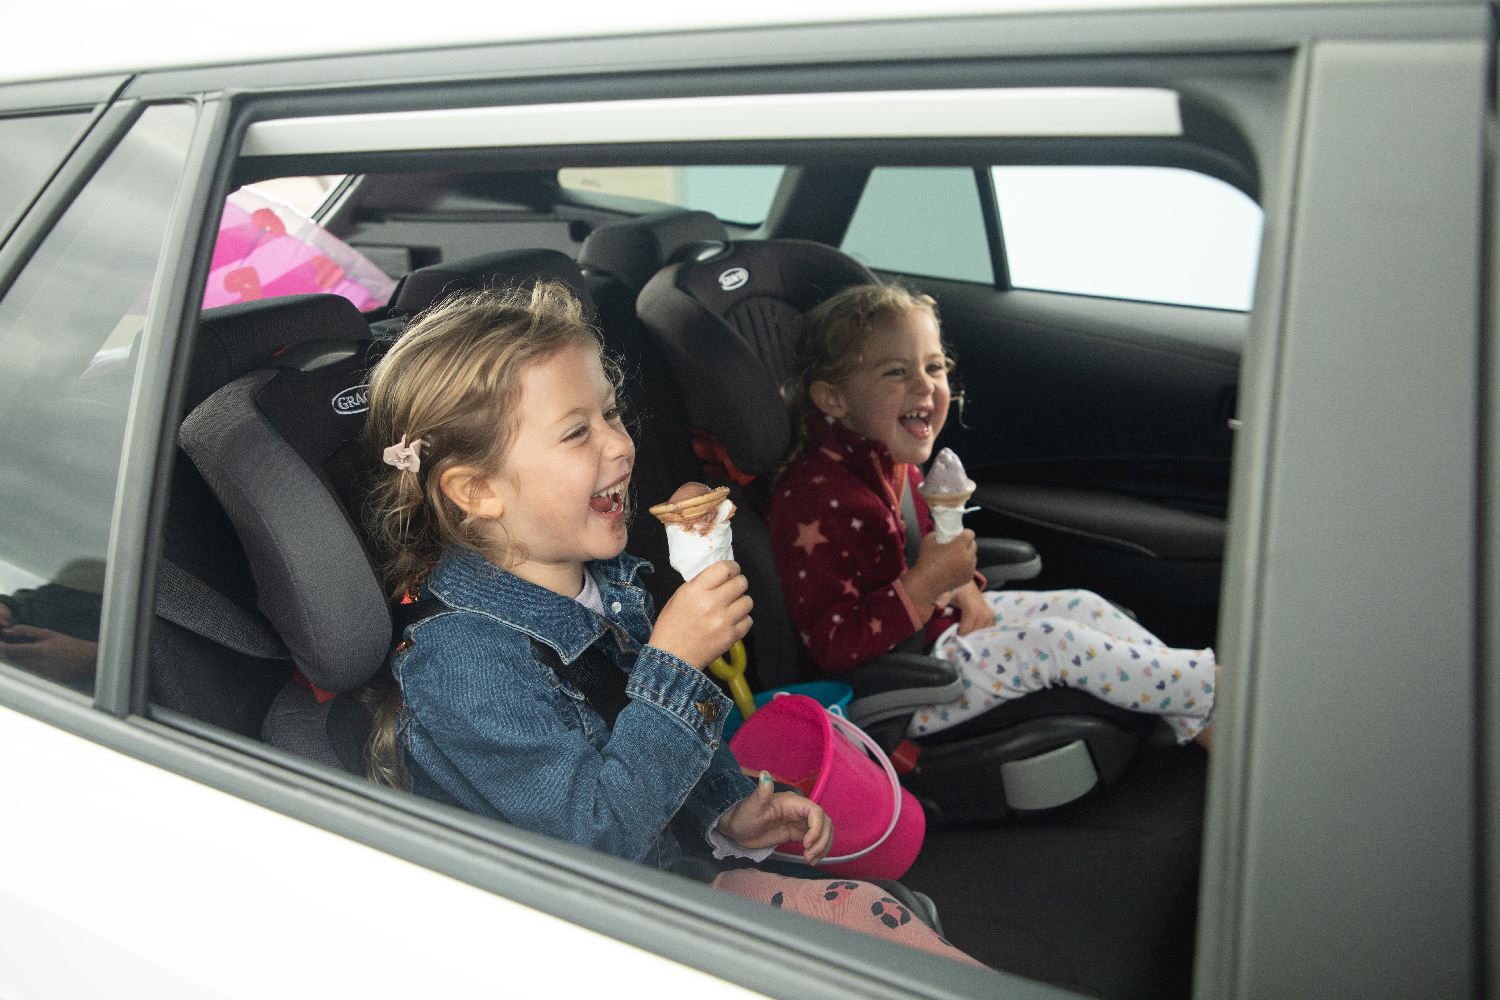 Two girls sitting in the car eating ice cream